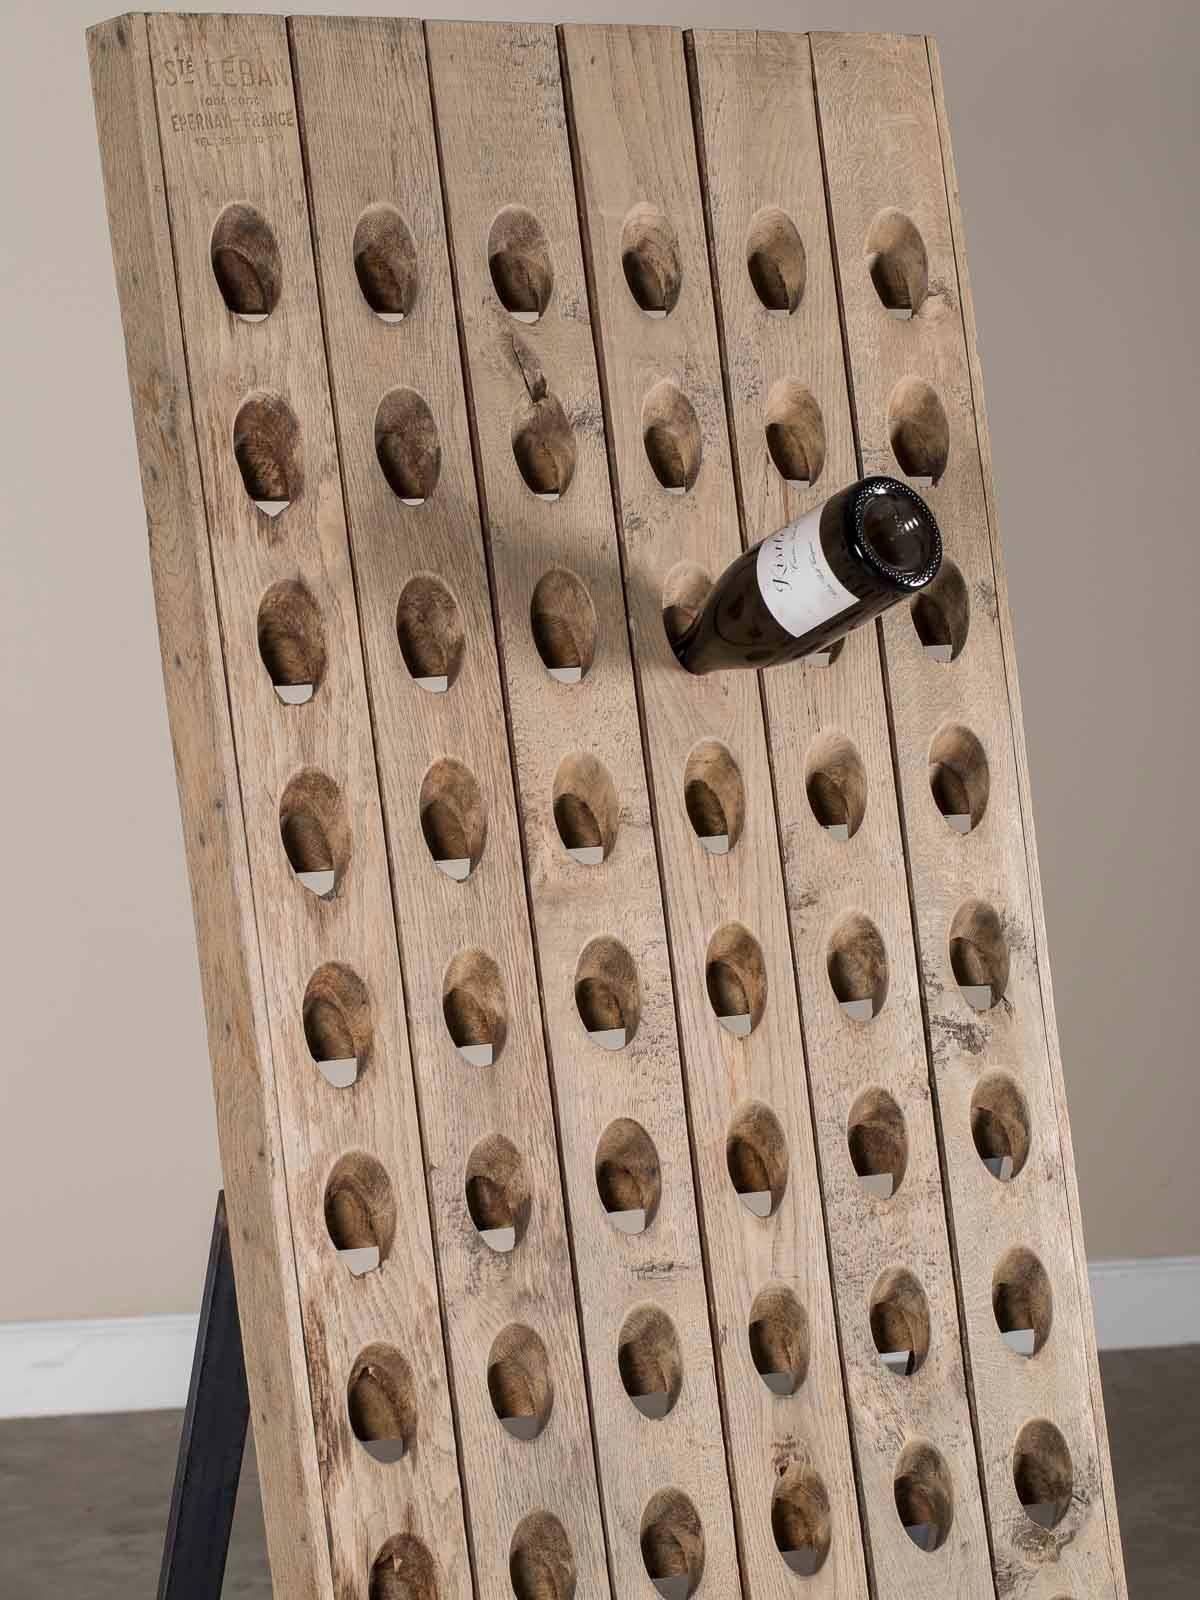 A terrific reuse of a traditional vintage champagne riddling rack mounted on a custom-made Industrial iron stand to create a custom wine storage rack. When champagne is in the fermenting process the bottles need to be turned on a regular schedule